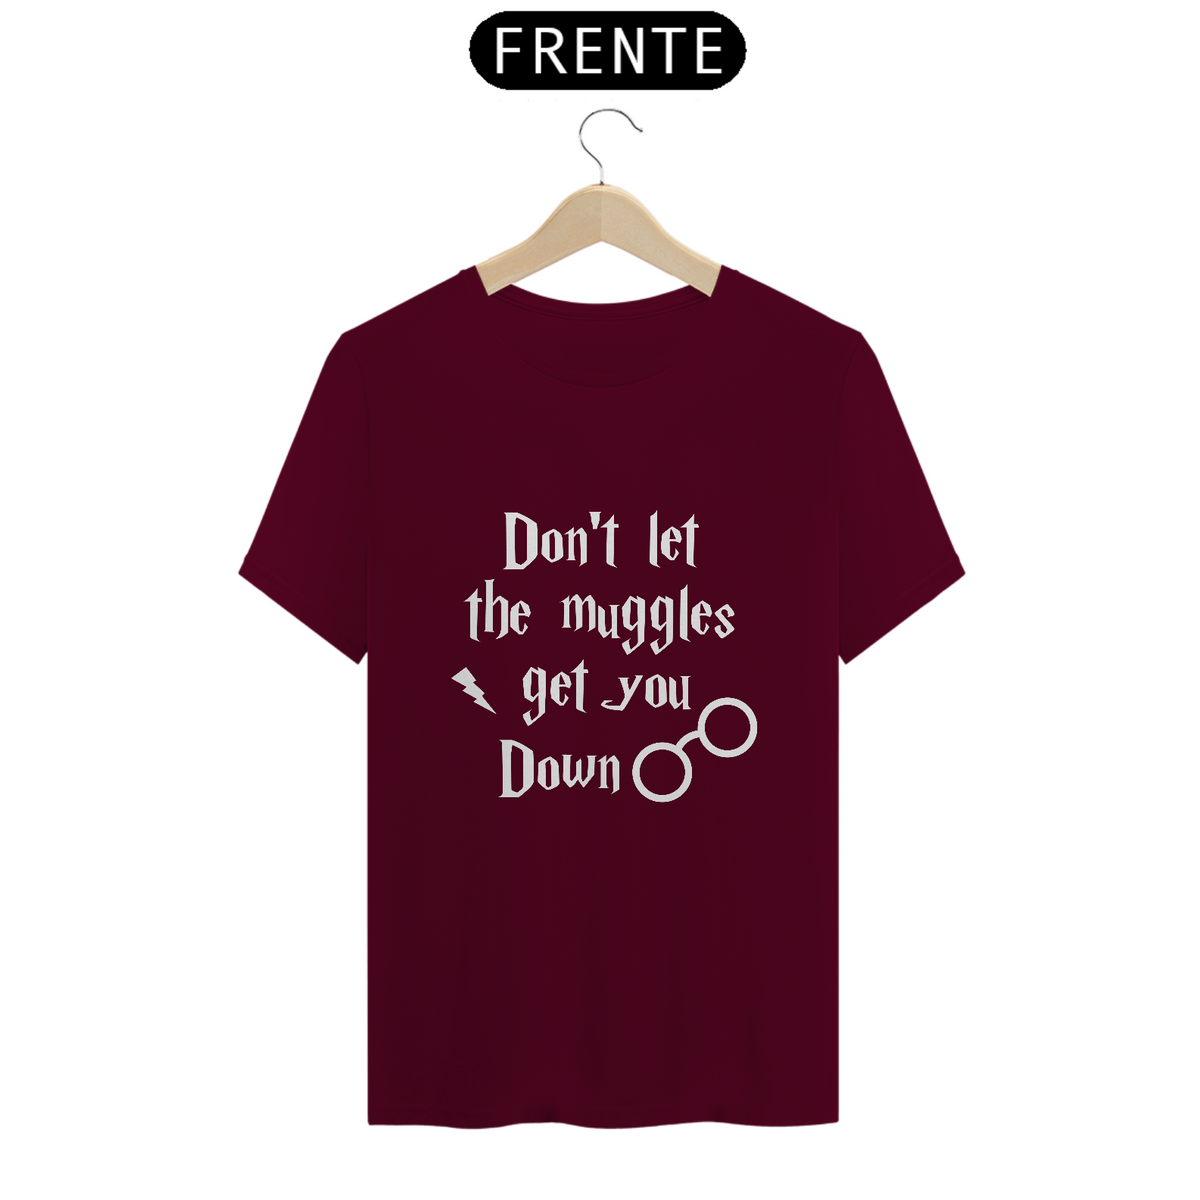 Nome do produto: T-Shirt - Don\'t let the muggles get you down